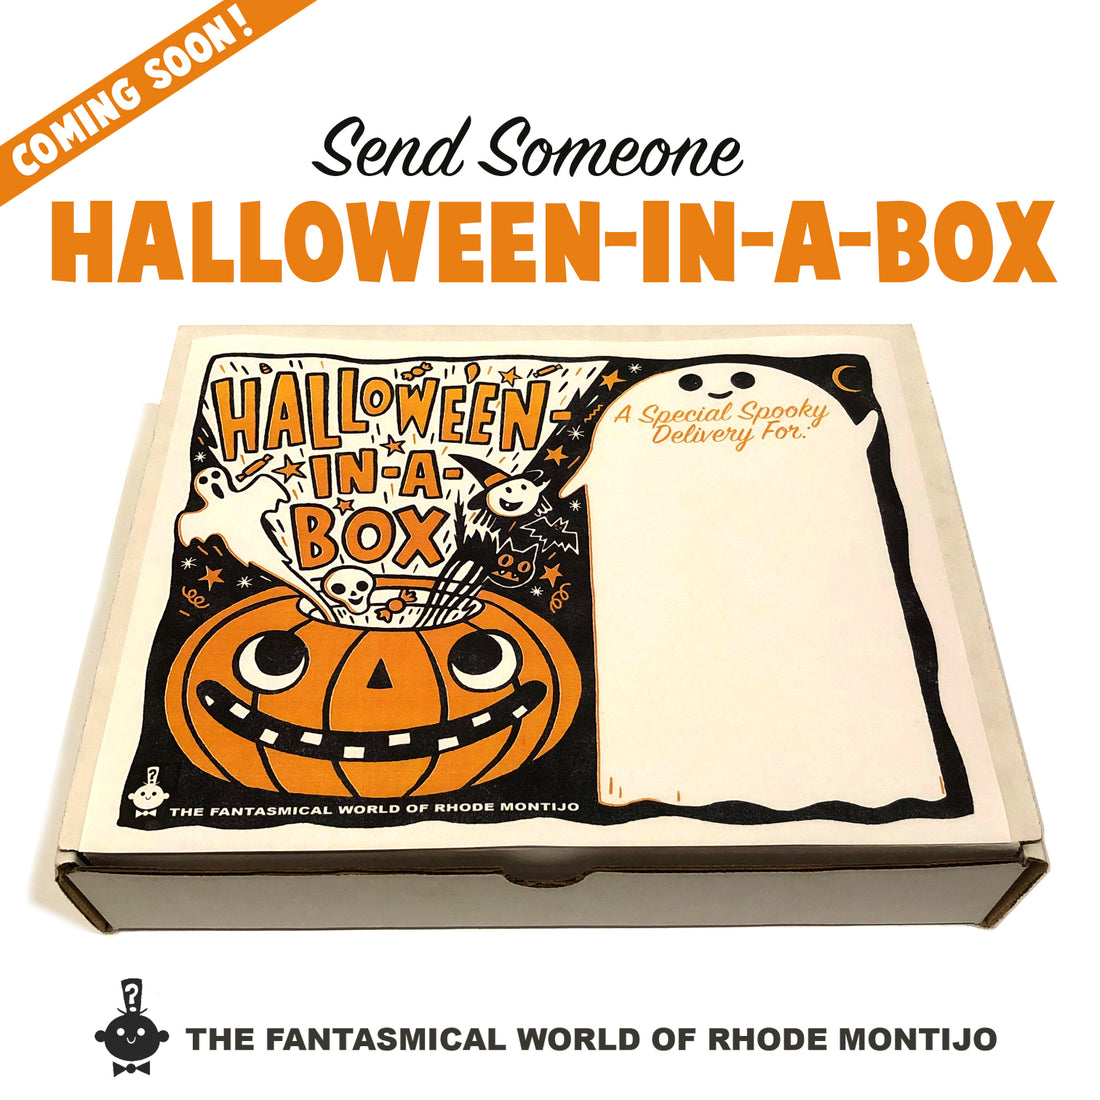 COMING SOON: Send someone Halloween-In-A-Box!